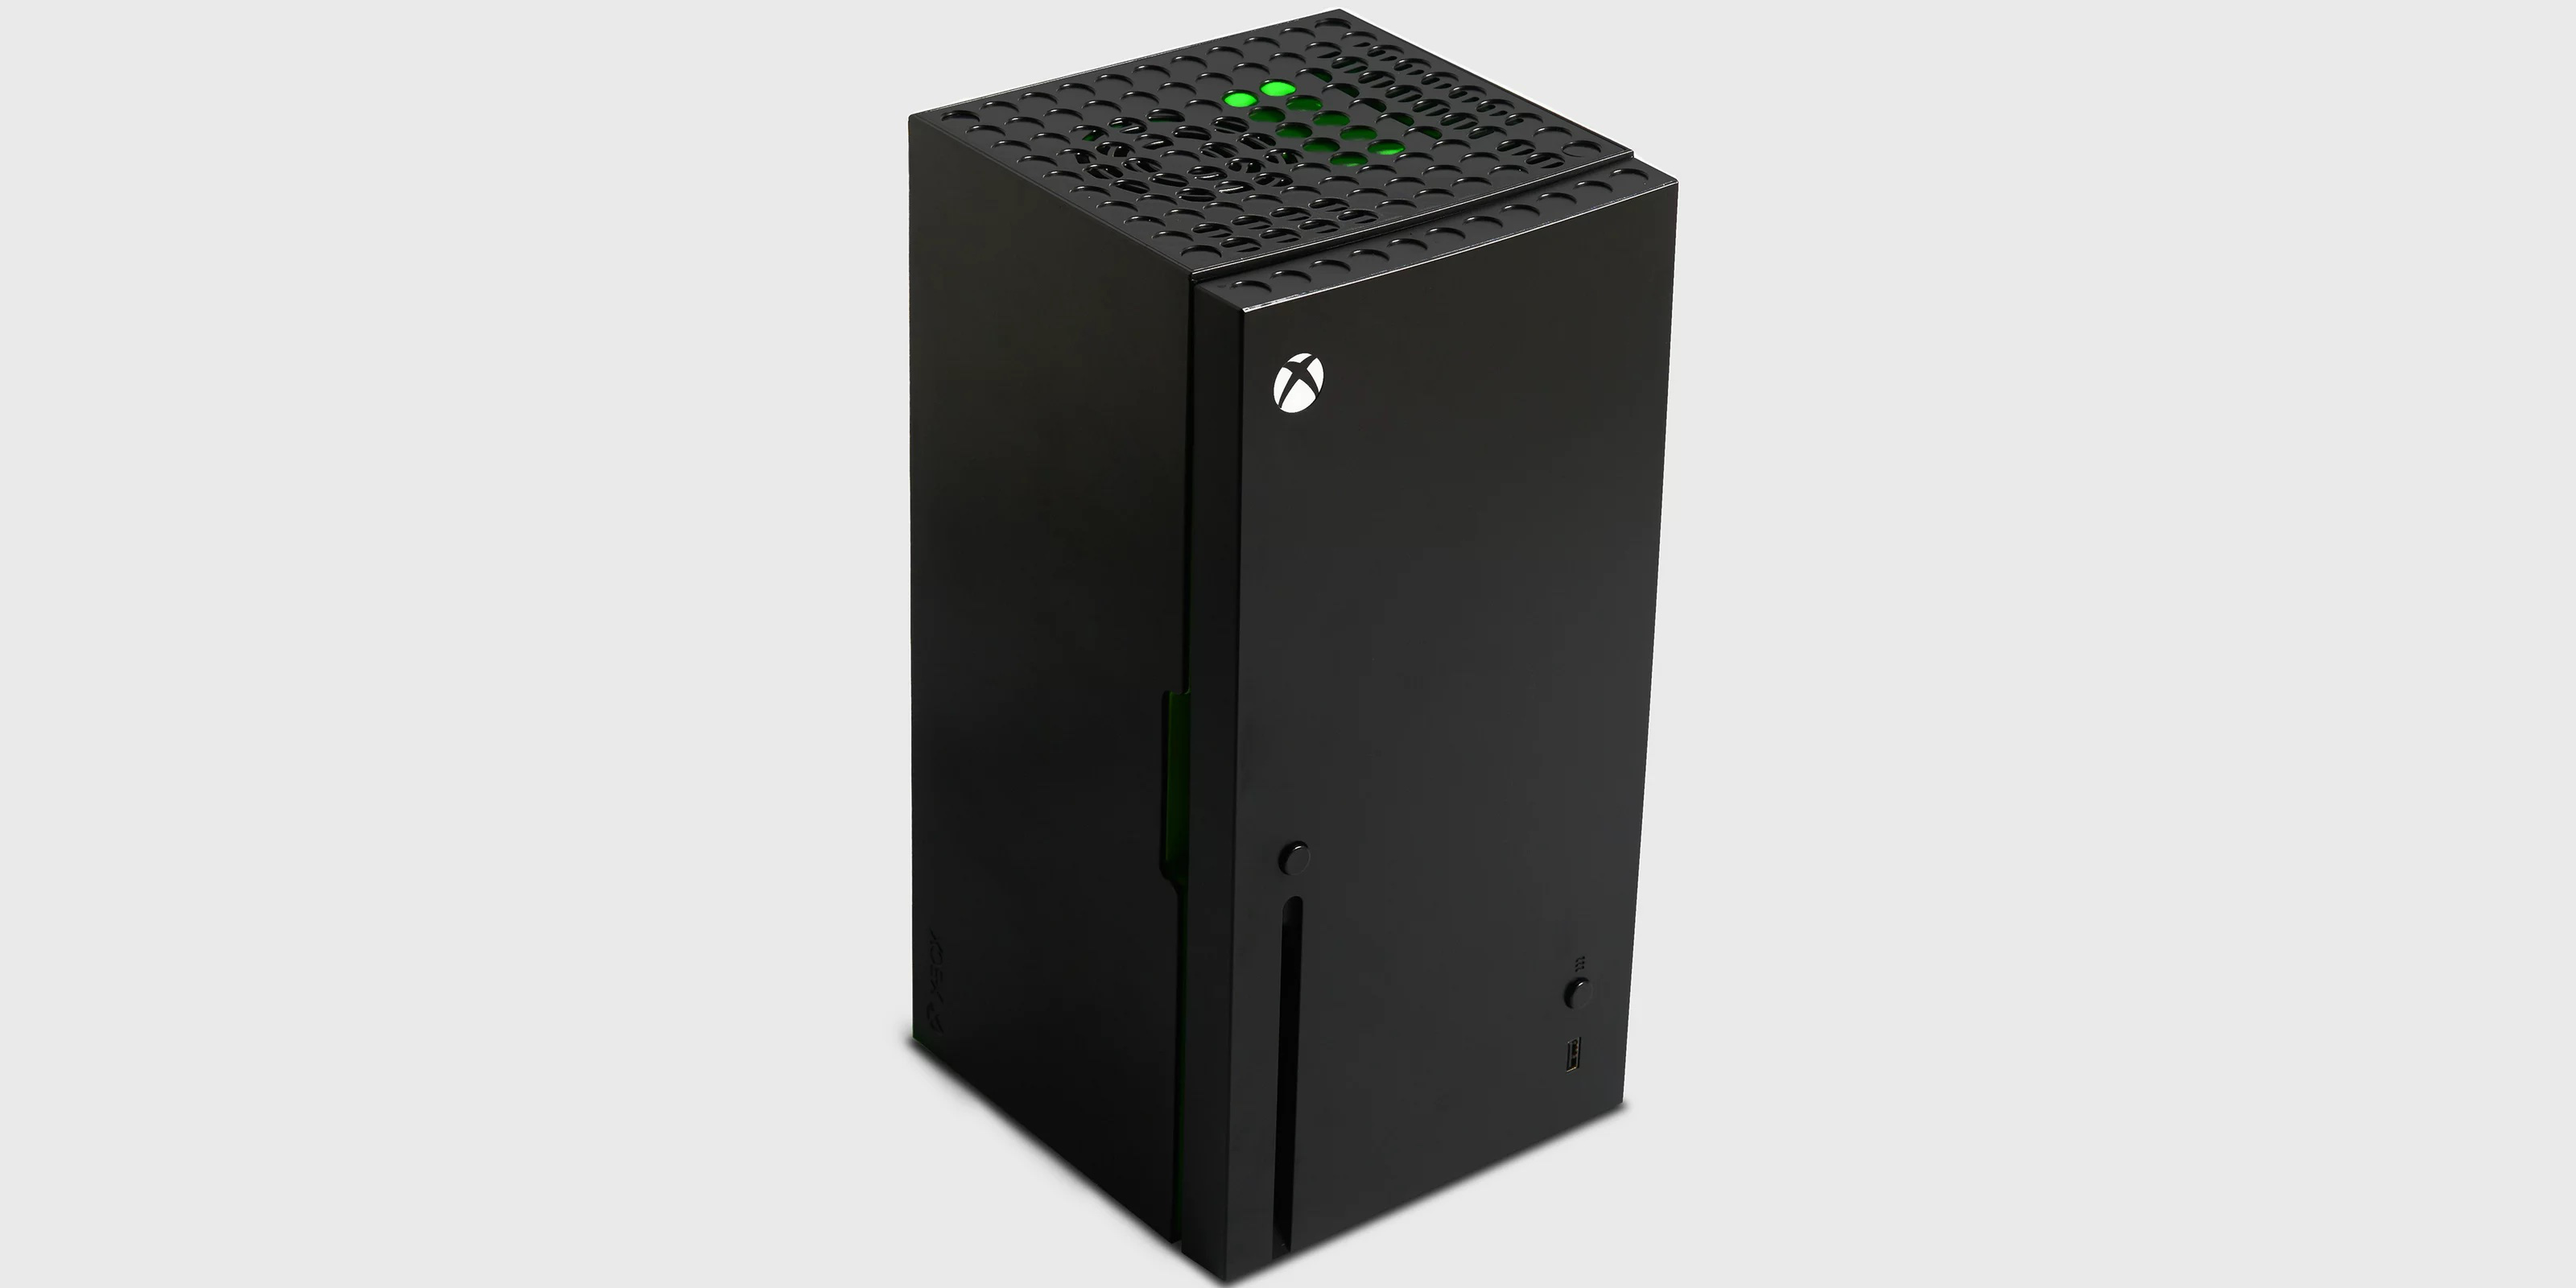 Collectible Xbox Series X Replica Mini Fridge hits one of the best prices  yet at $35 (Reg. $79+)